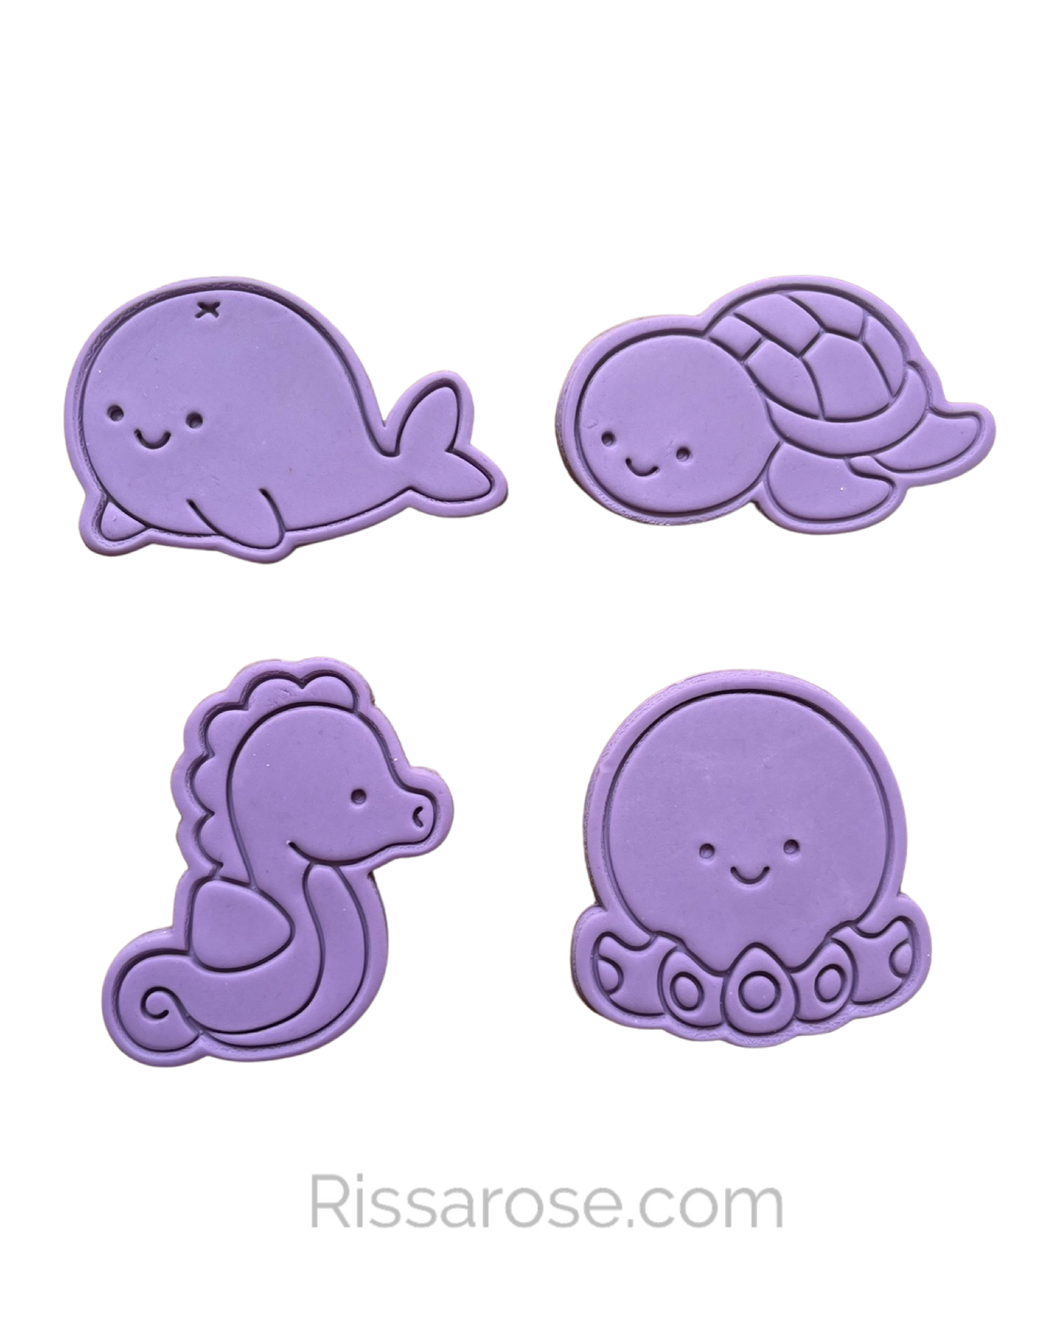 Sea Creatures  Cookie Cutter Stamp Sea Horse Shark Octopus Clam Starfish Crab Shell Whale Turtle Urchin